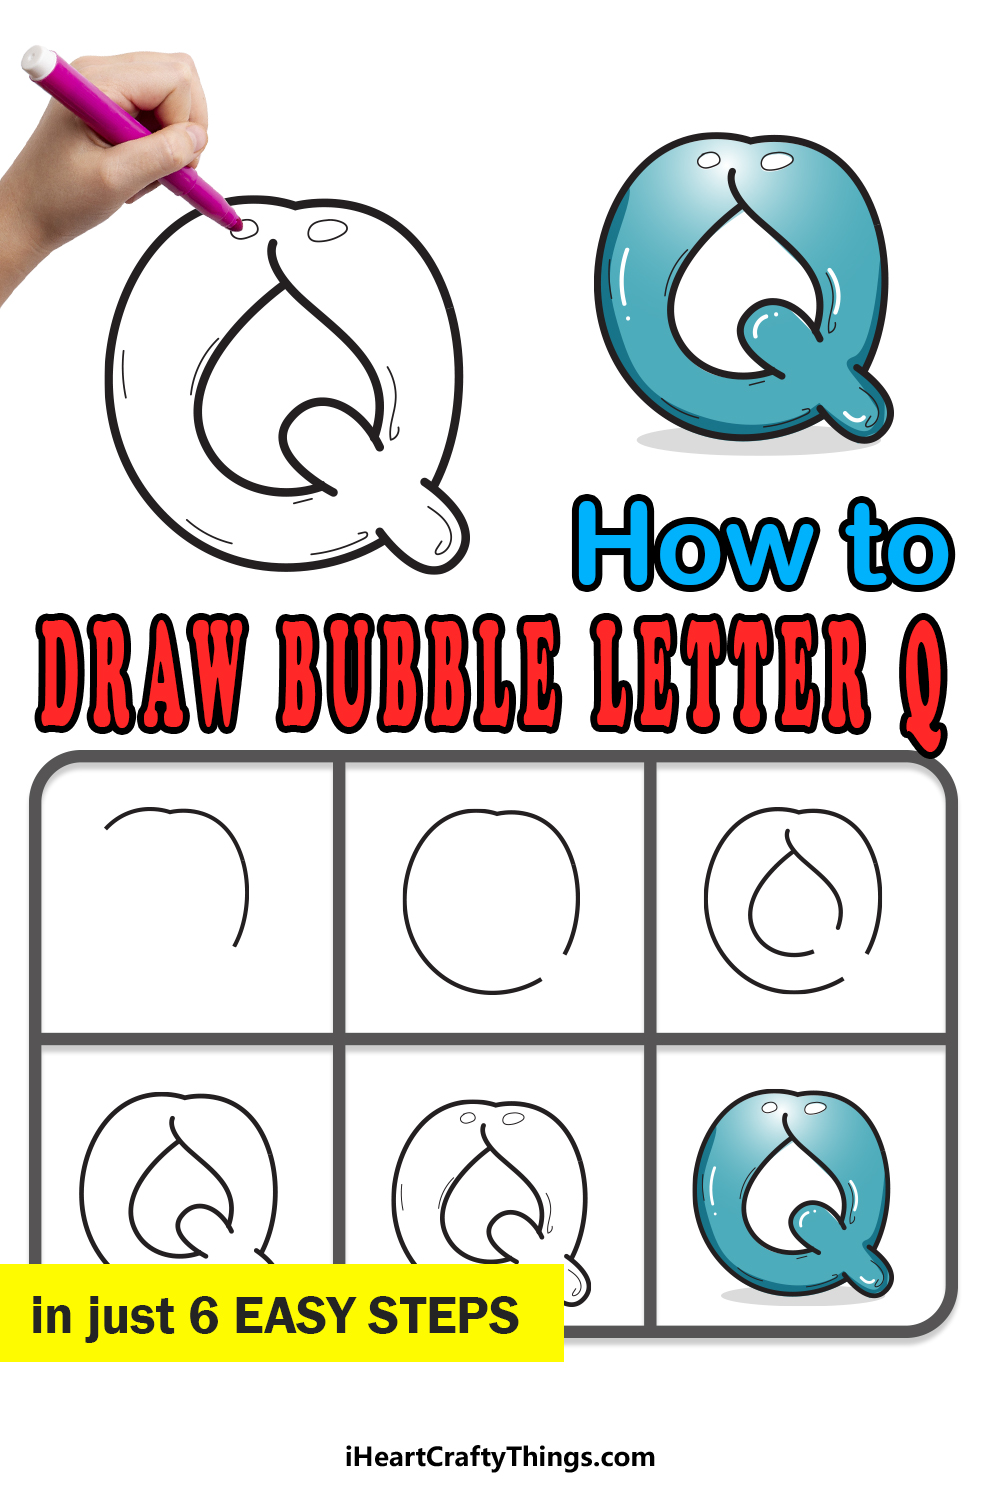 How To Draw Your Own Bubble Q step by step guide